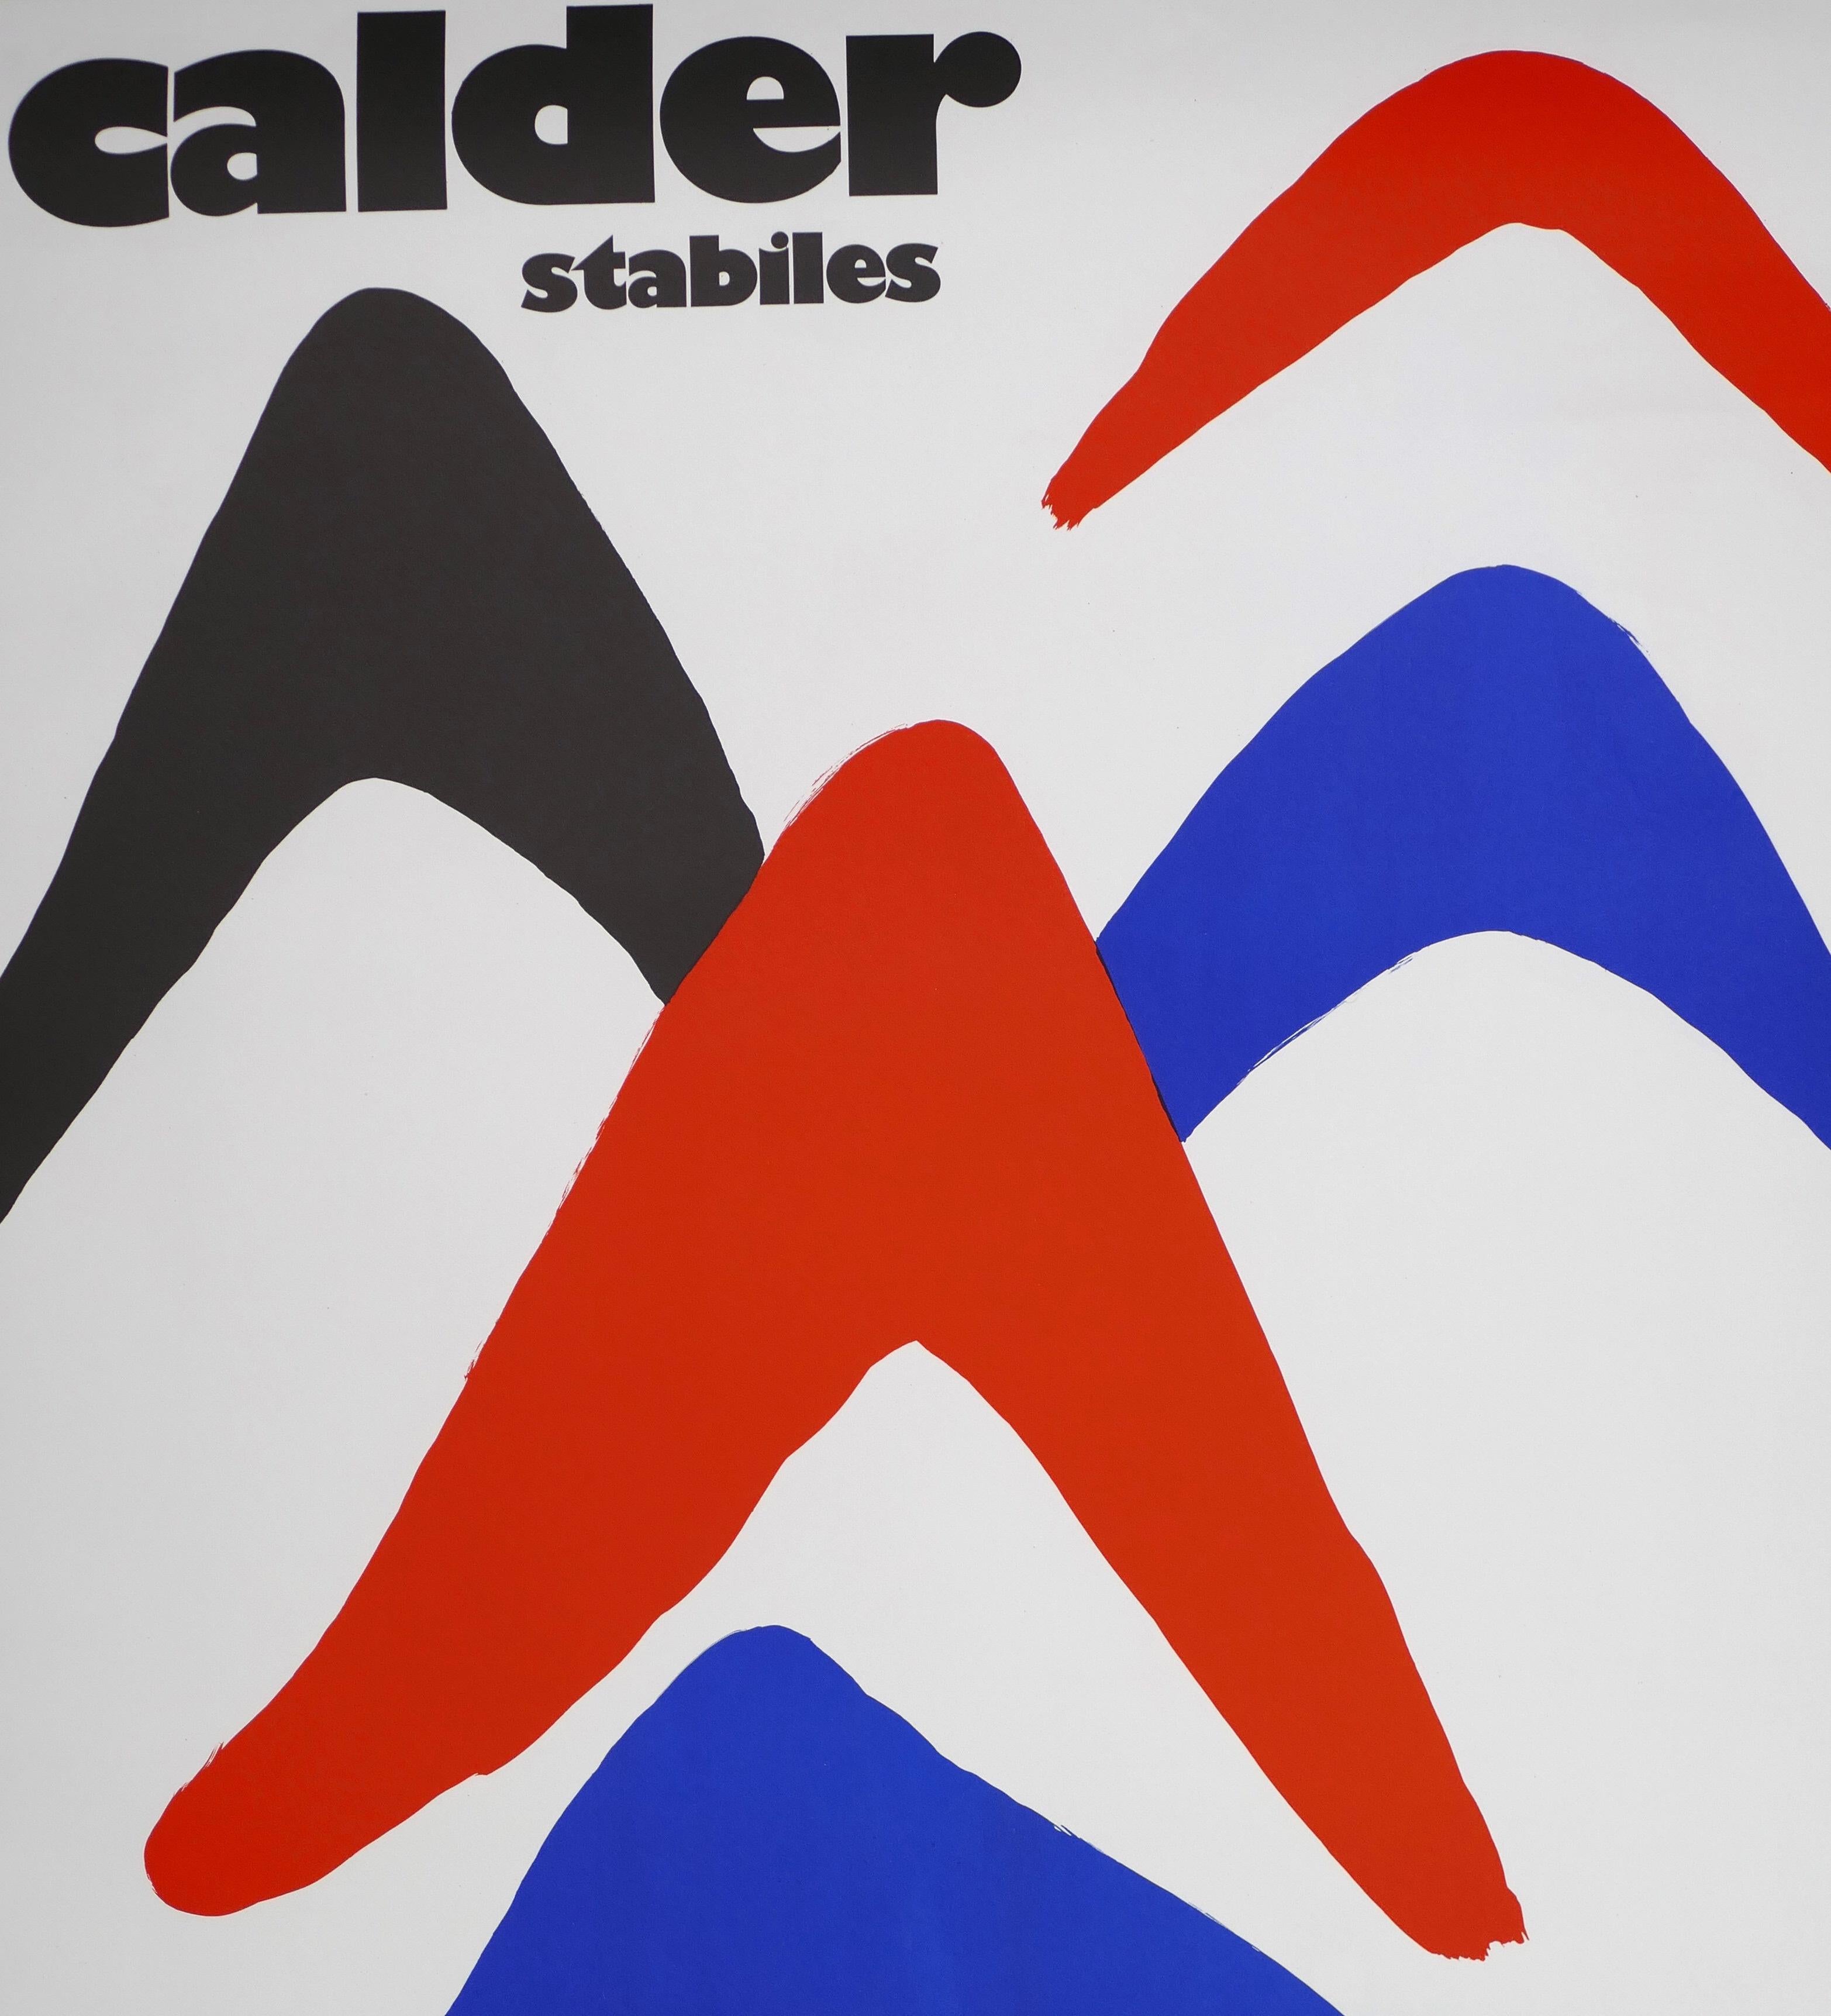 Alexander Calder Exhibition Poster is an original lithographic poster realized for the exhibition 